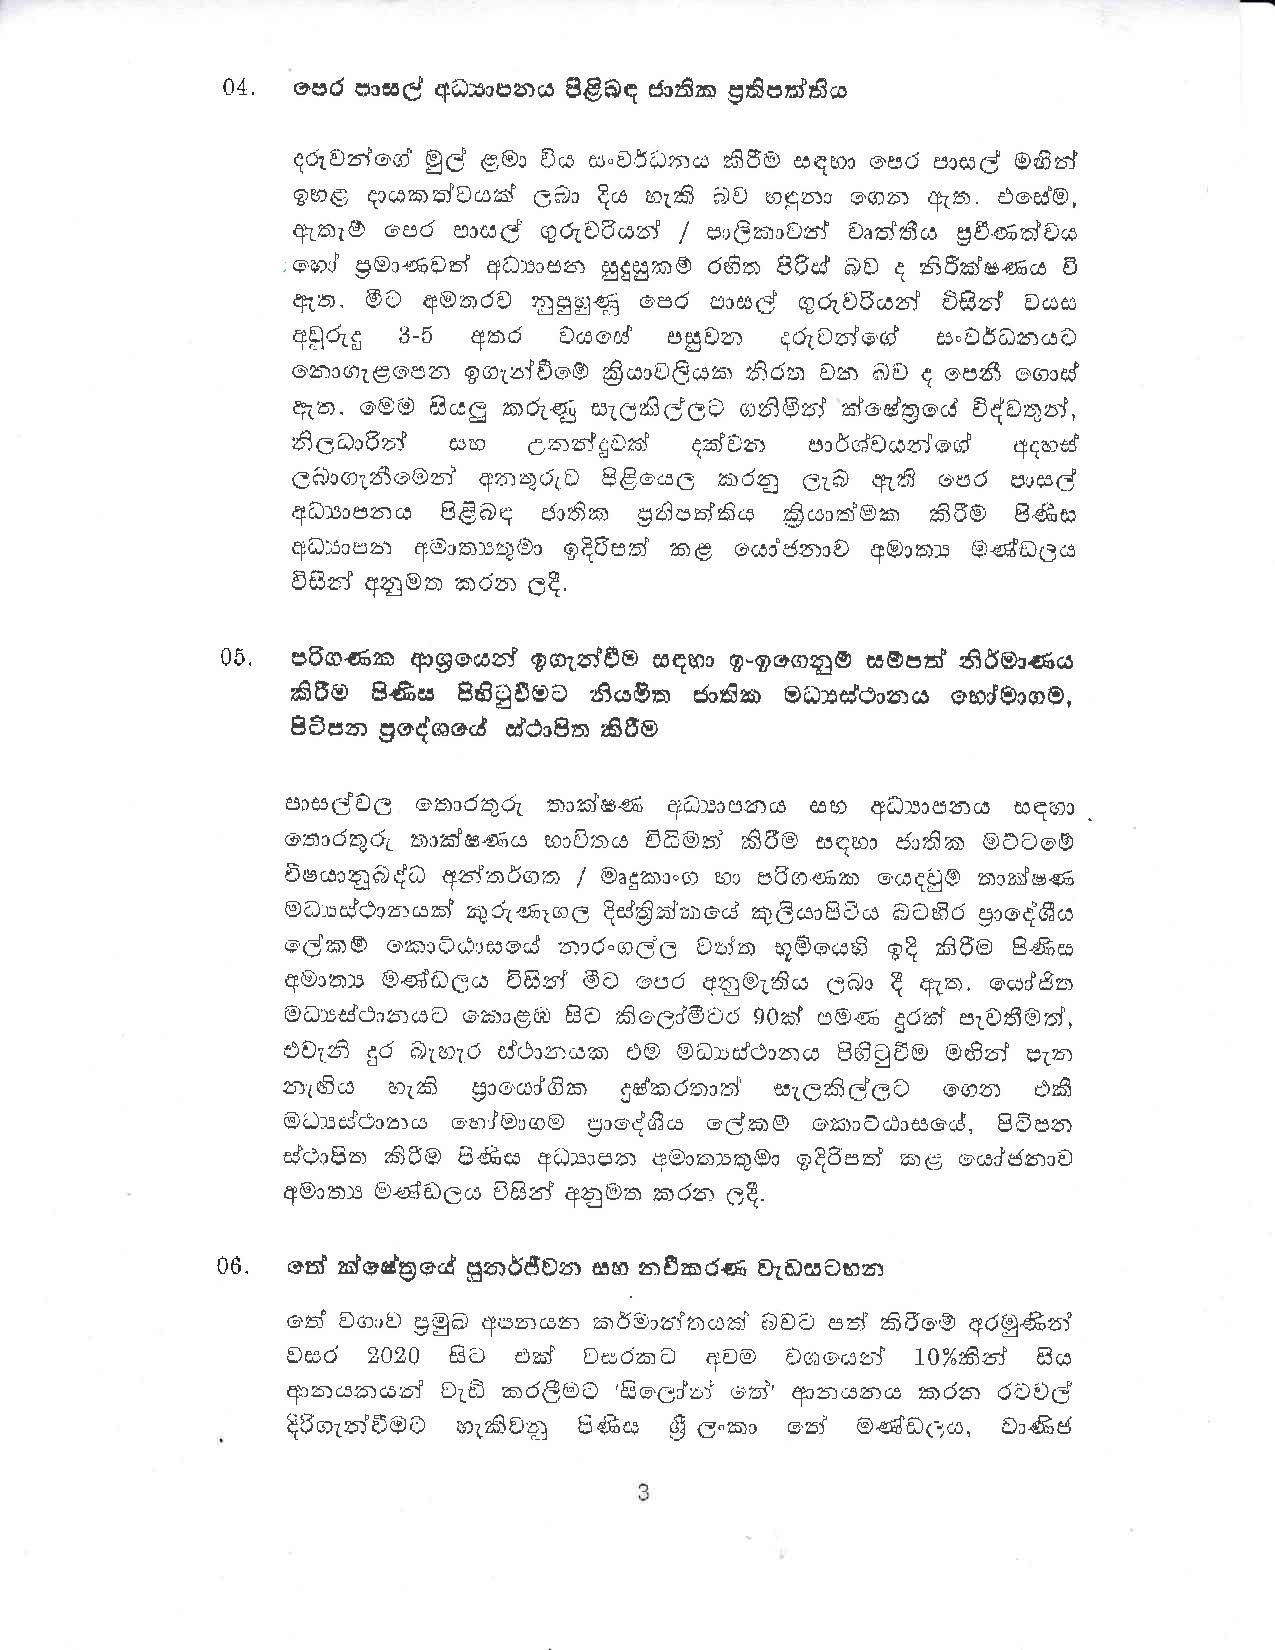 Cabinet Decision on 02.01.2020 1 page 003